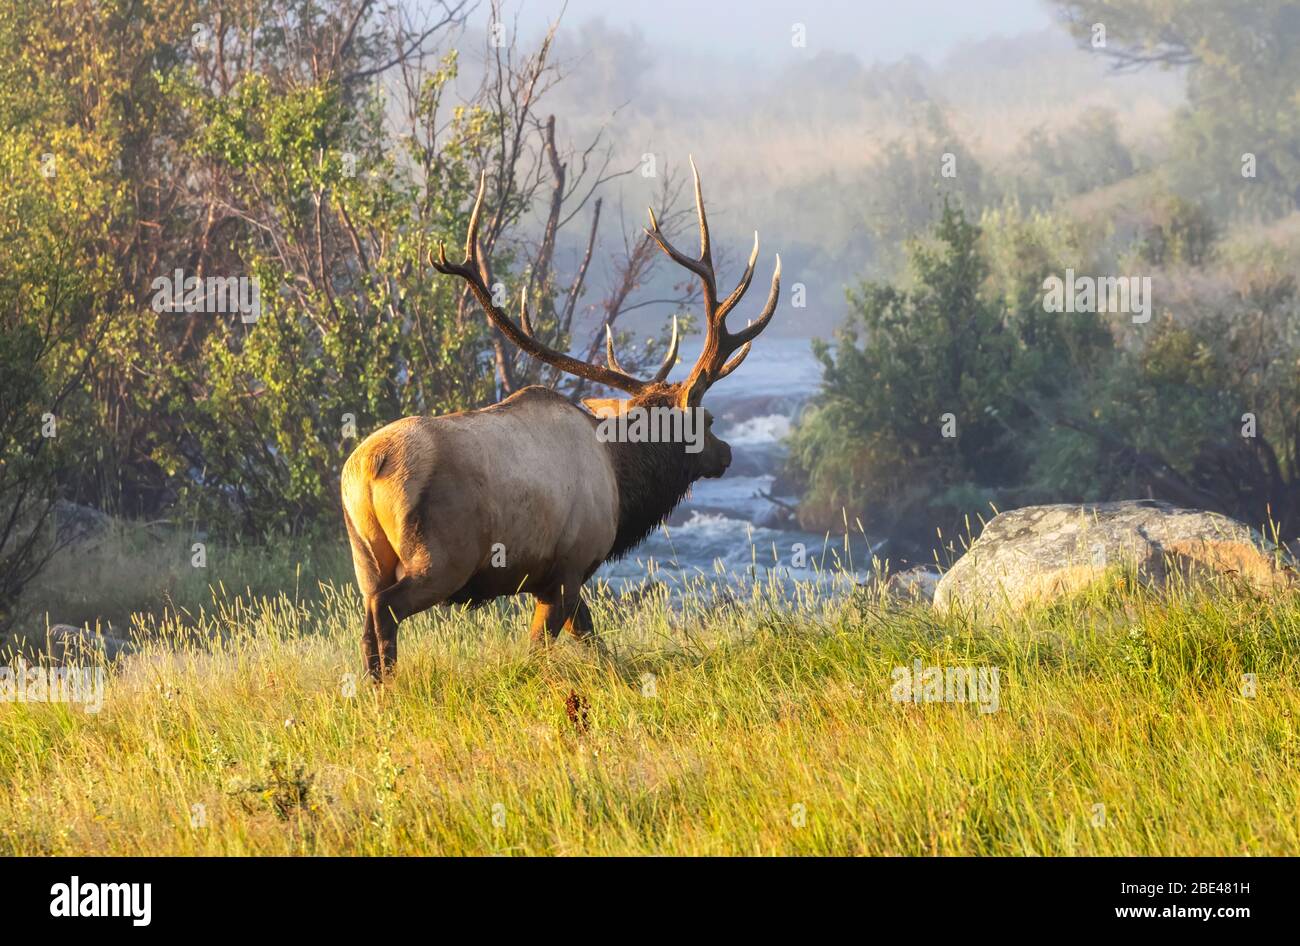 Bull elk (Cervus canadensis) standing by a river with autumn coloured foliage; Estes Park, Colorado, United States of America Stock Photo